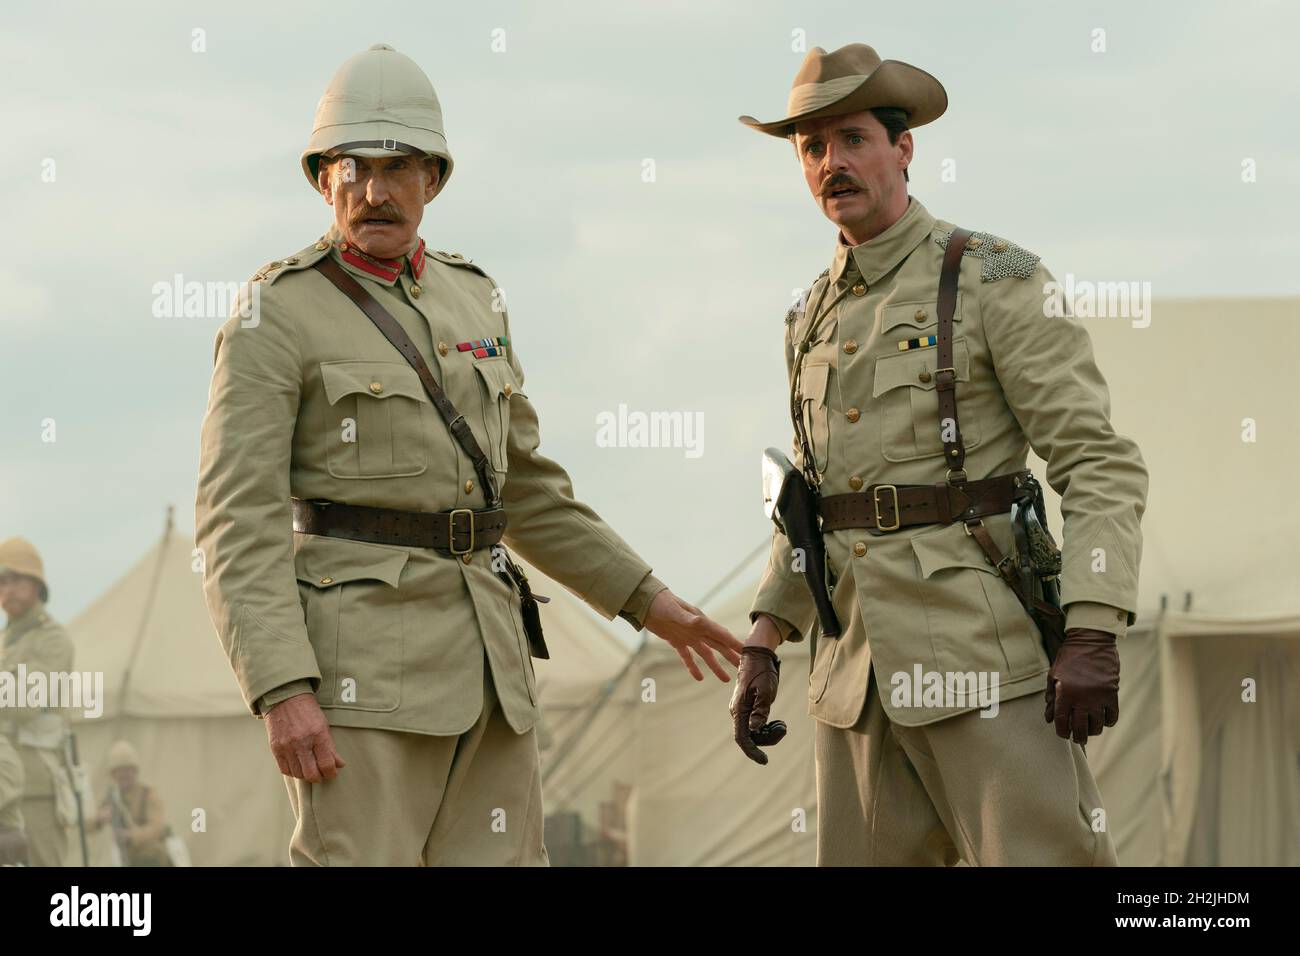 (L-R) Matthew Goode as Morton and Charles Dance as Kitchener in 20th Century Studios’ THE KING’S MAN. Photo credit: Peter Mountain / 20th Century Studios / The Hollywood Archive Stock Photo